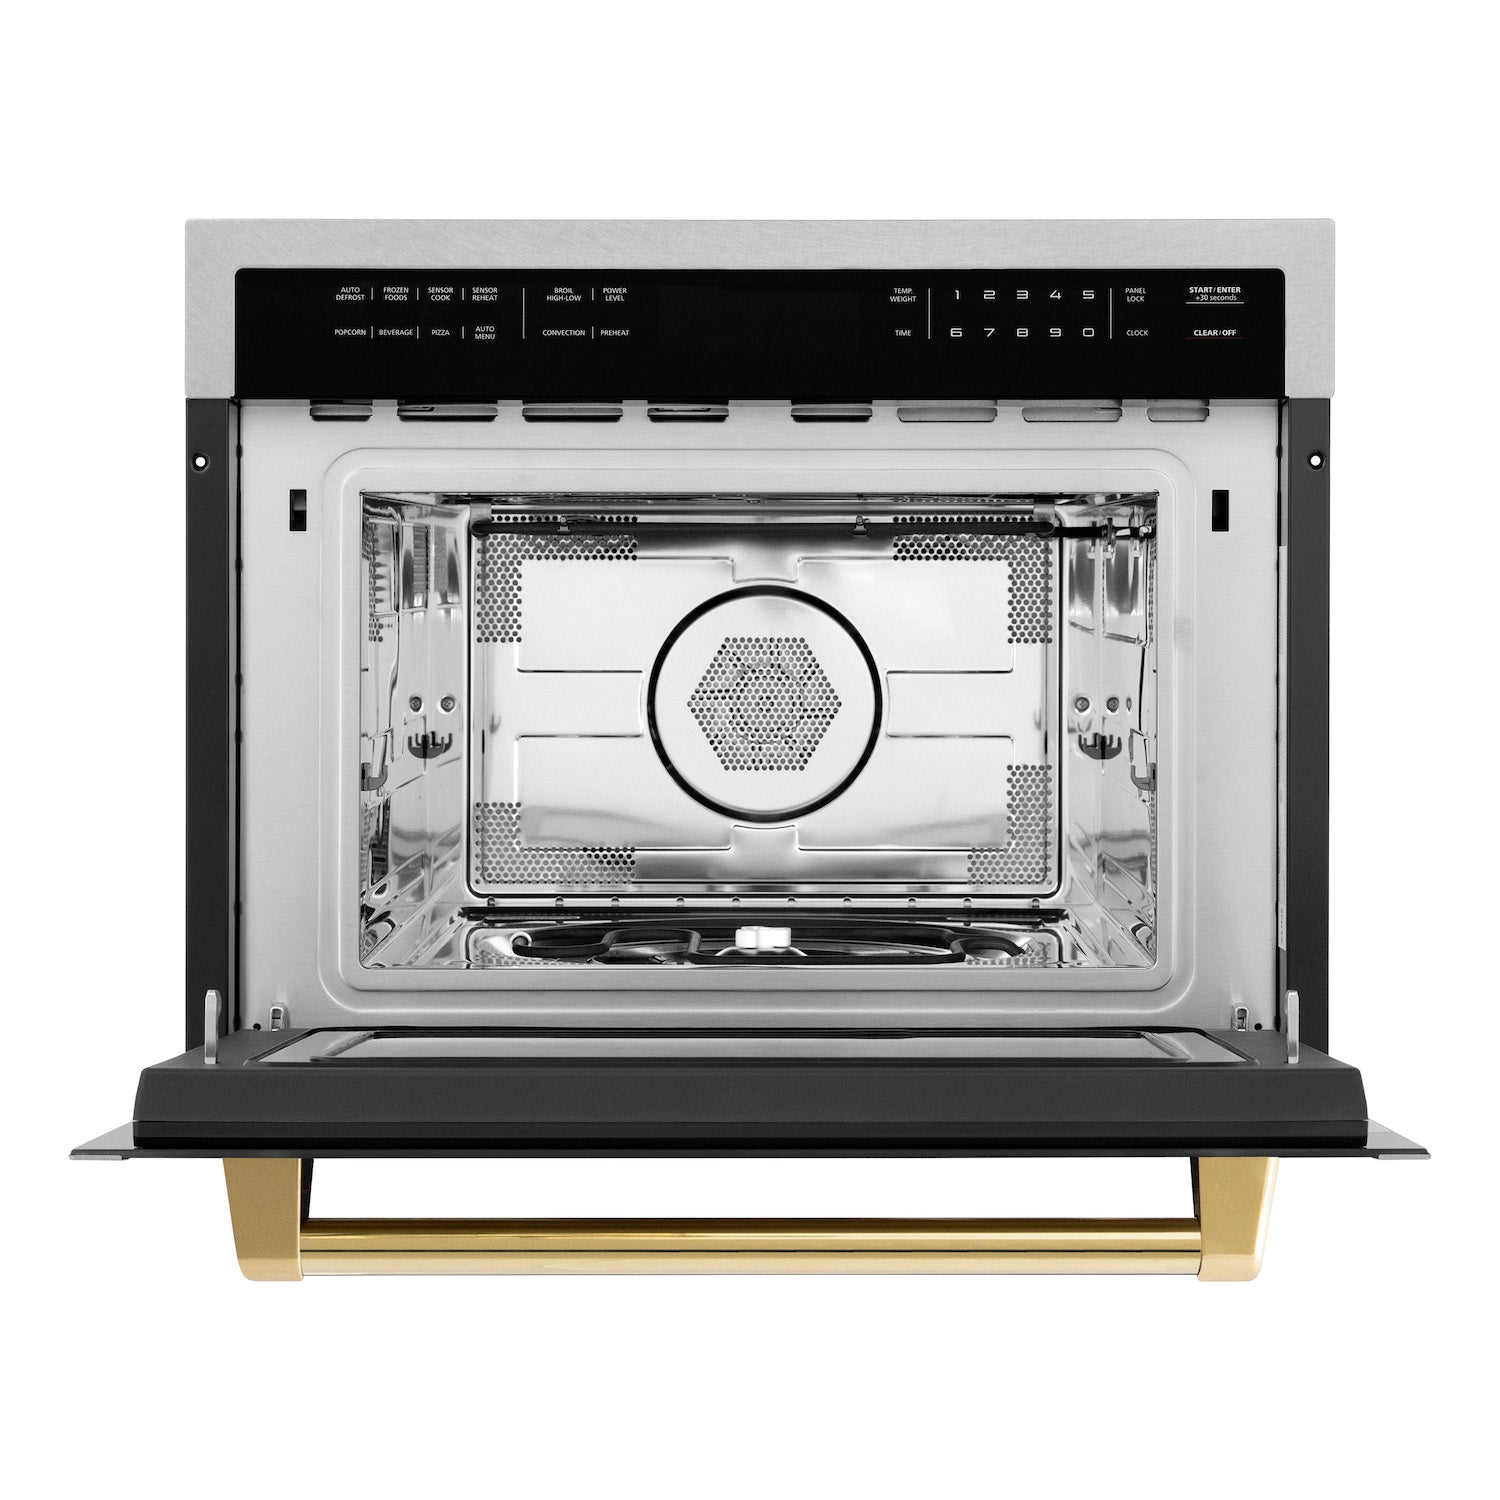 ZLINE Autograph Edition 24" Built-in Convection Microwave Oven - DuraSnow Stainless Steel with Accents